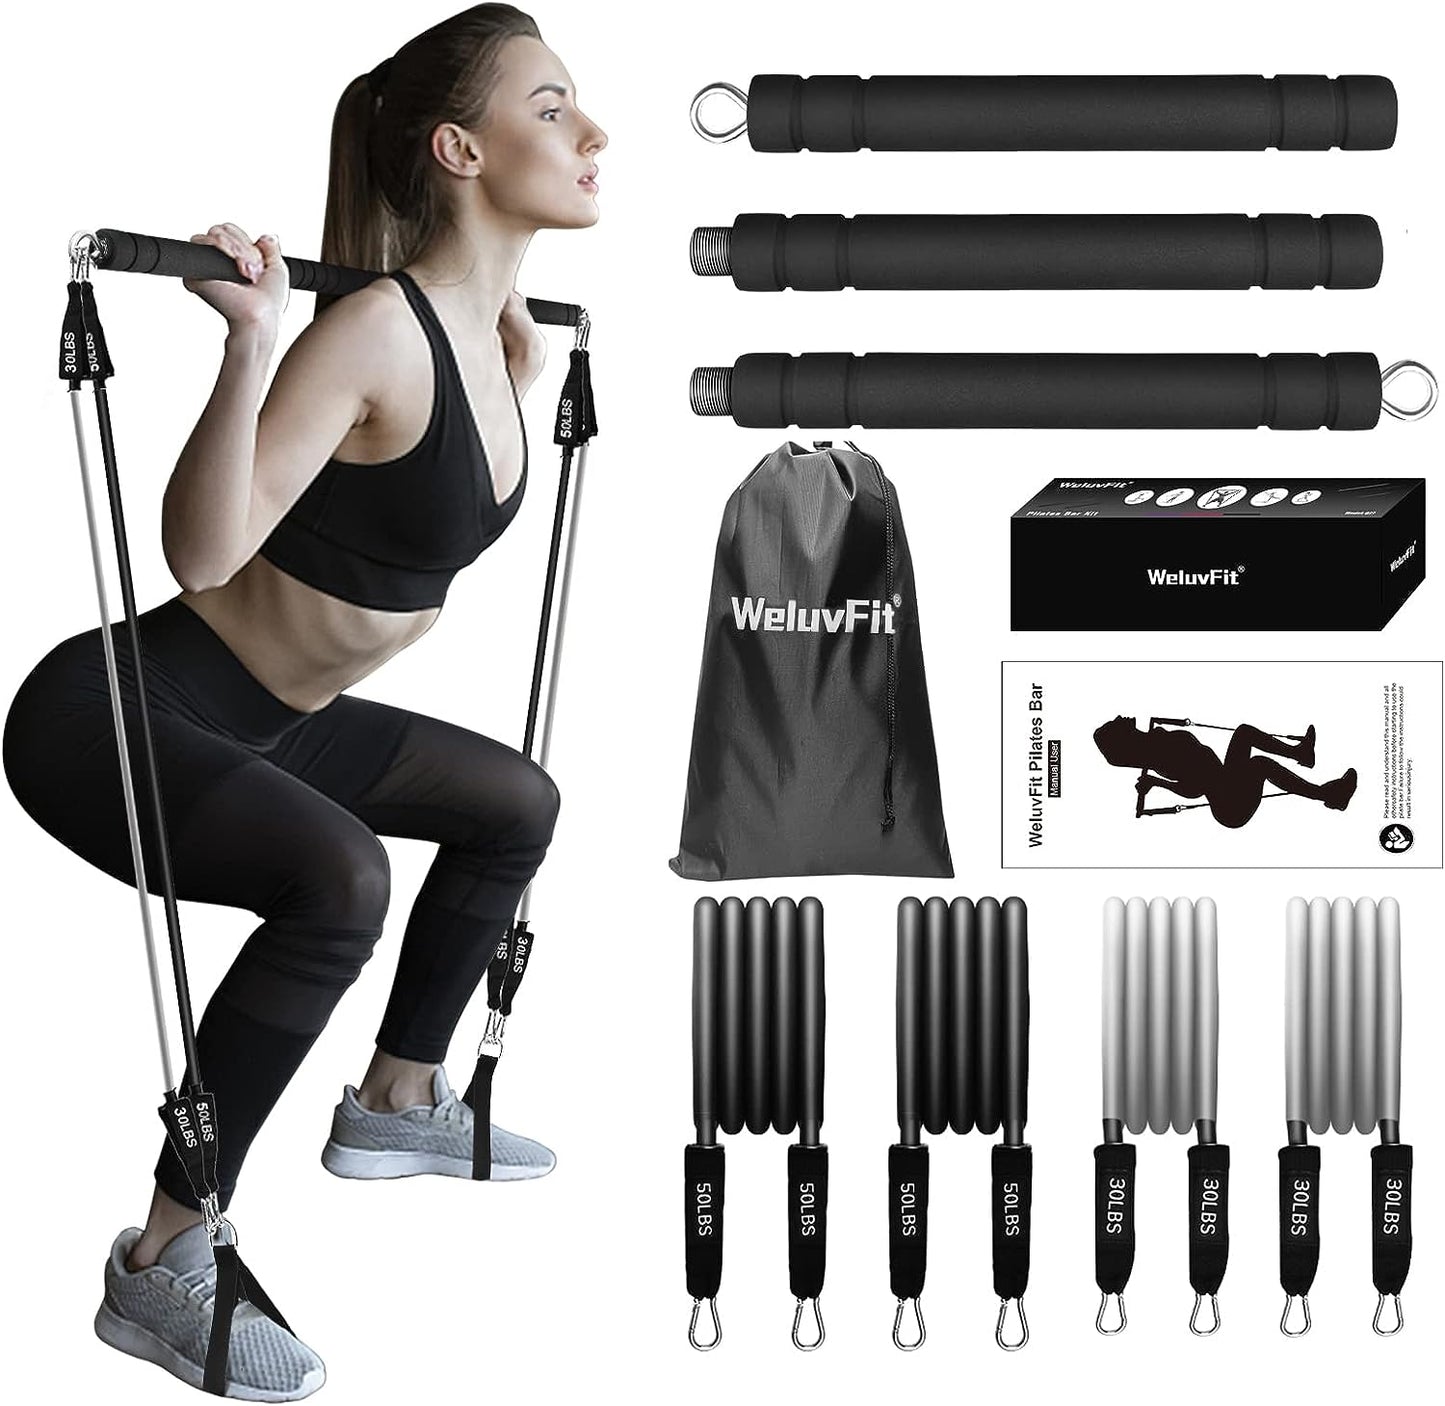 Bar Kit with Resistance Bands, WeluvFit Exercise Fitness Equipment for Women & Men, Home Gym Workouts Stainless Steel Stick Squat Yoga Pilates Flexbands Kit for Full Body Shaping